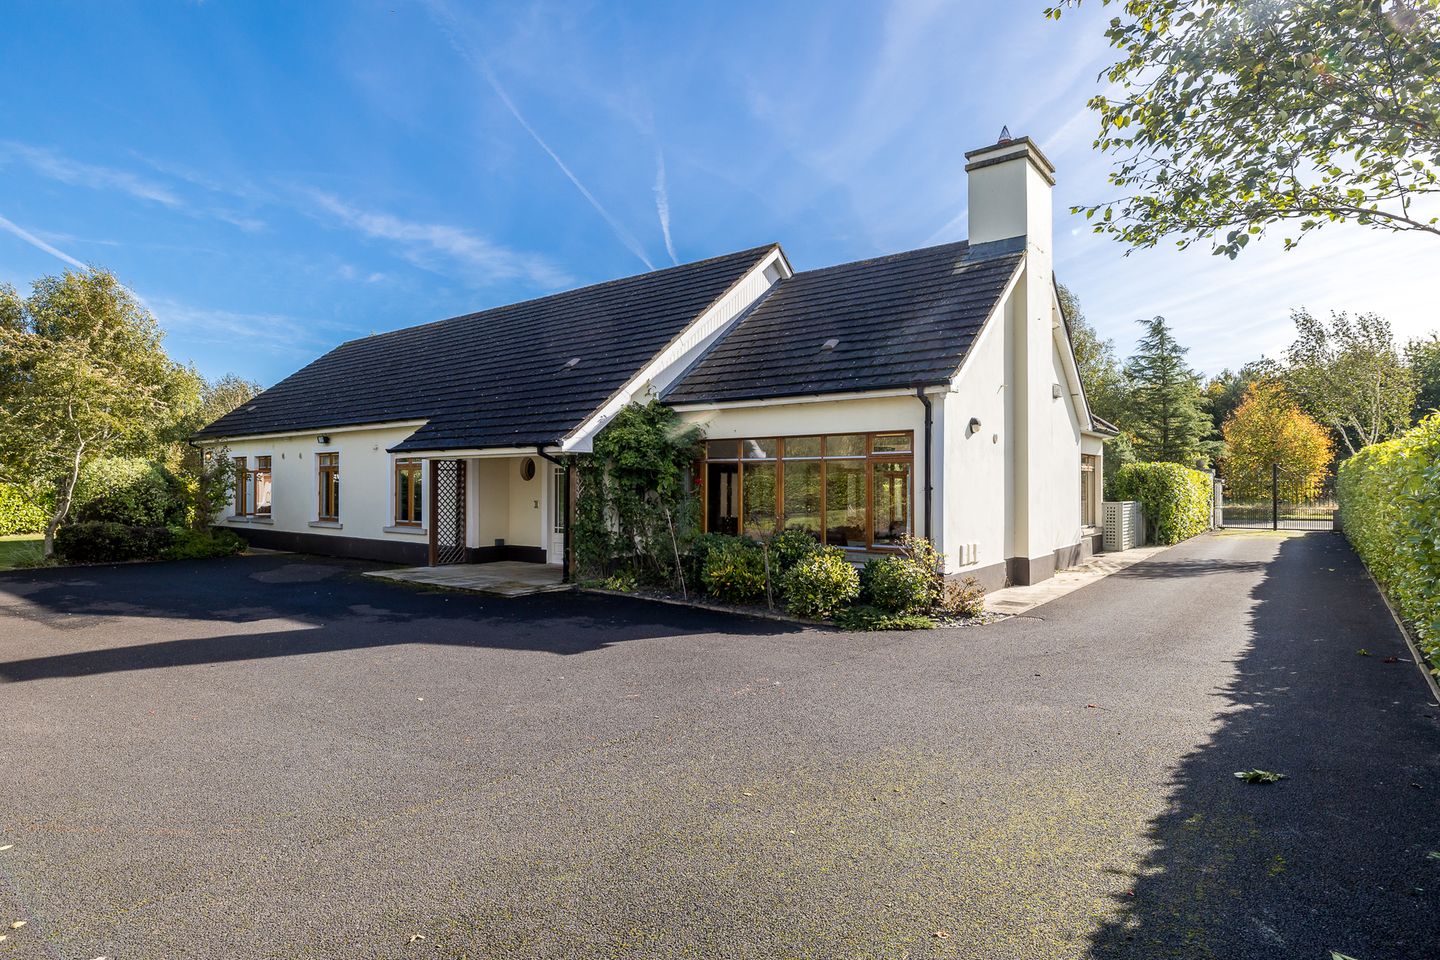 19 Roganstown Golf and Country Club, Swords, Co. Dublin